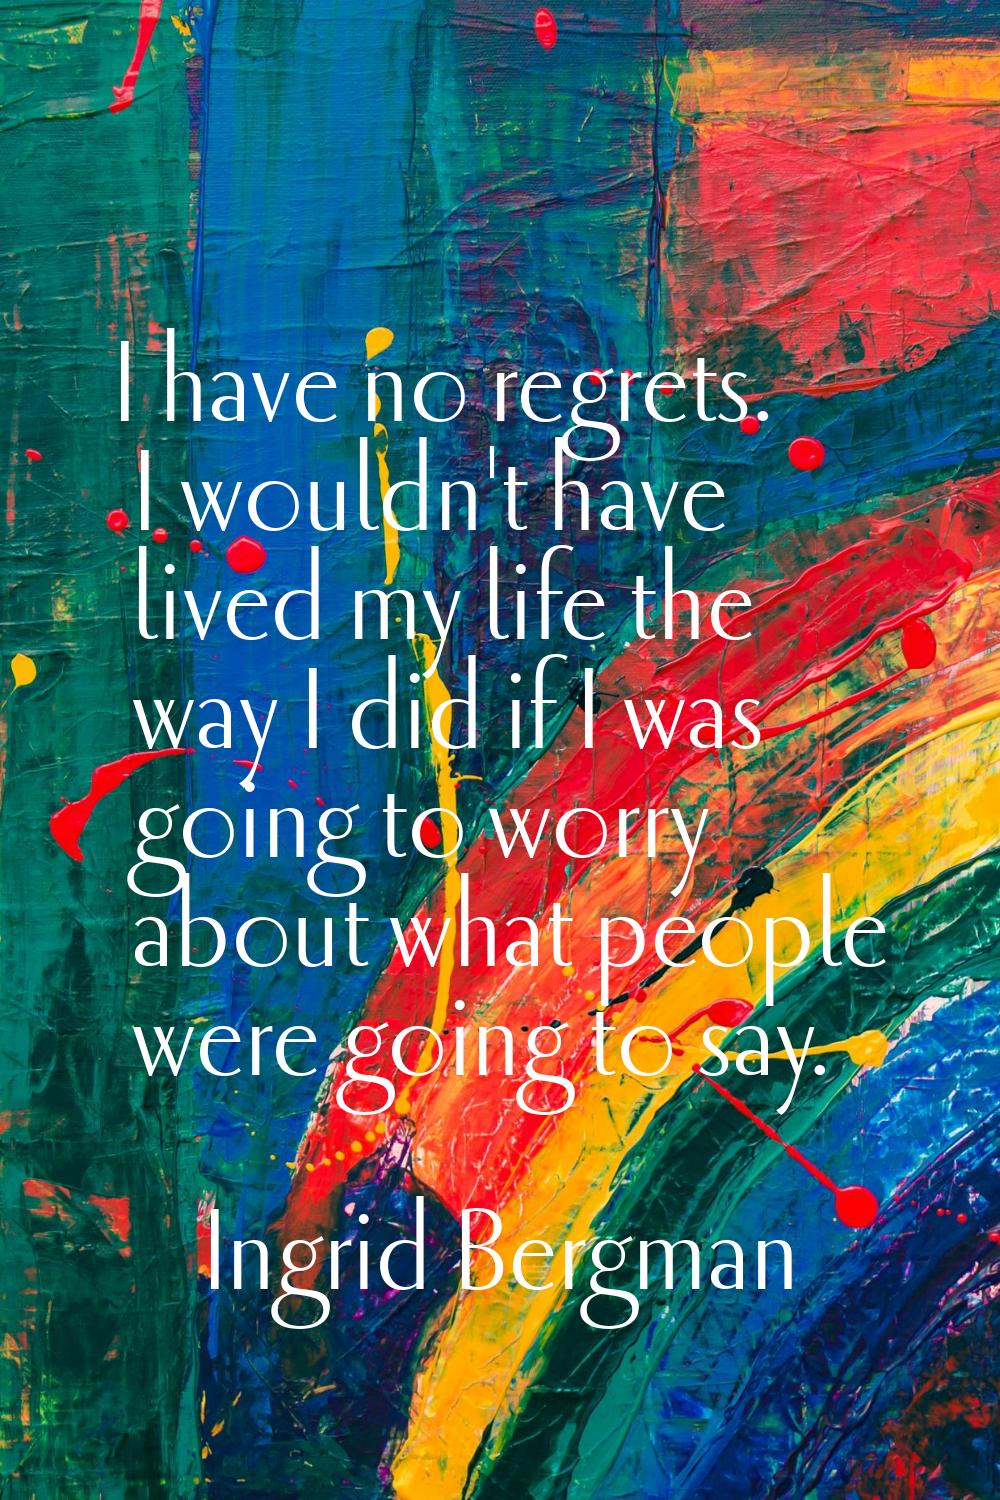 I have no regrets. I wouldn't have lived my life the way I did if I was going to worry about what p